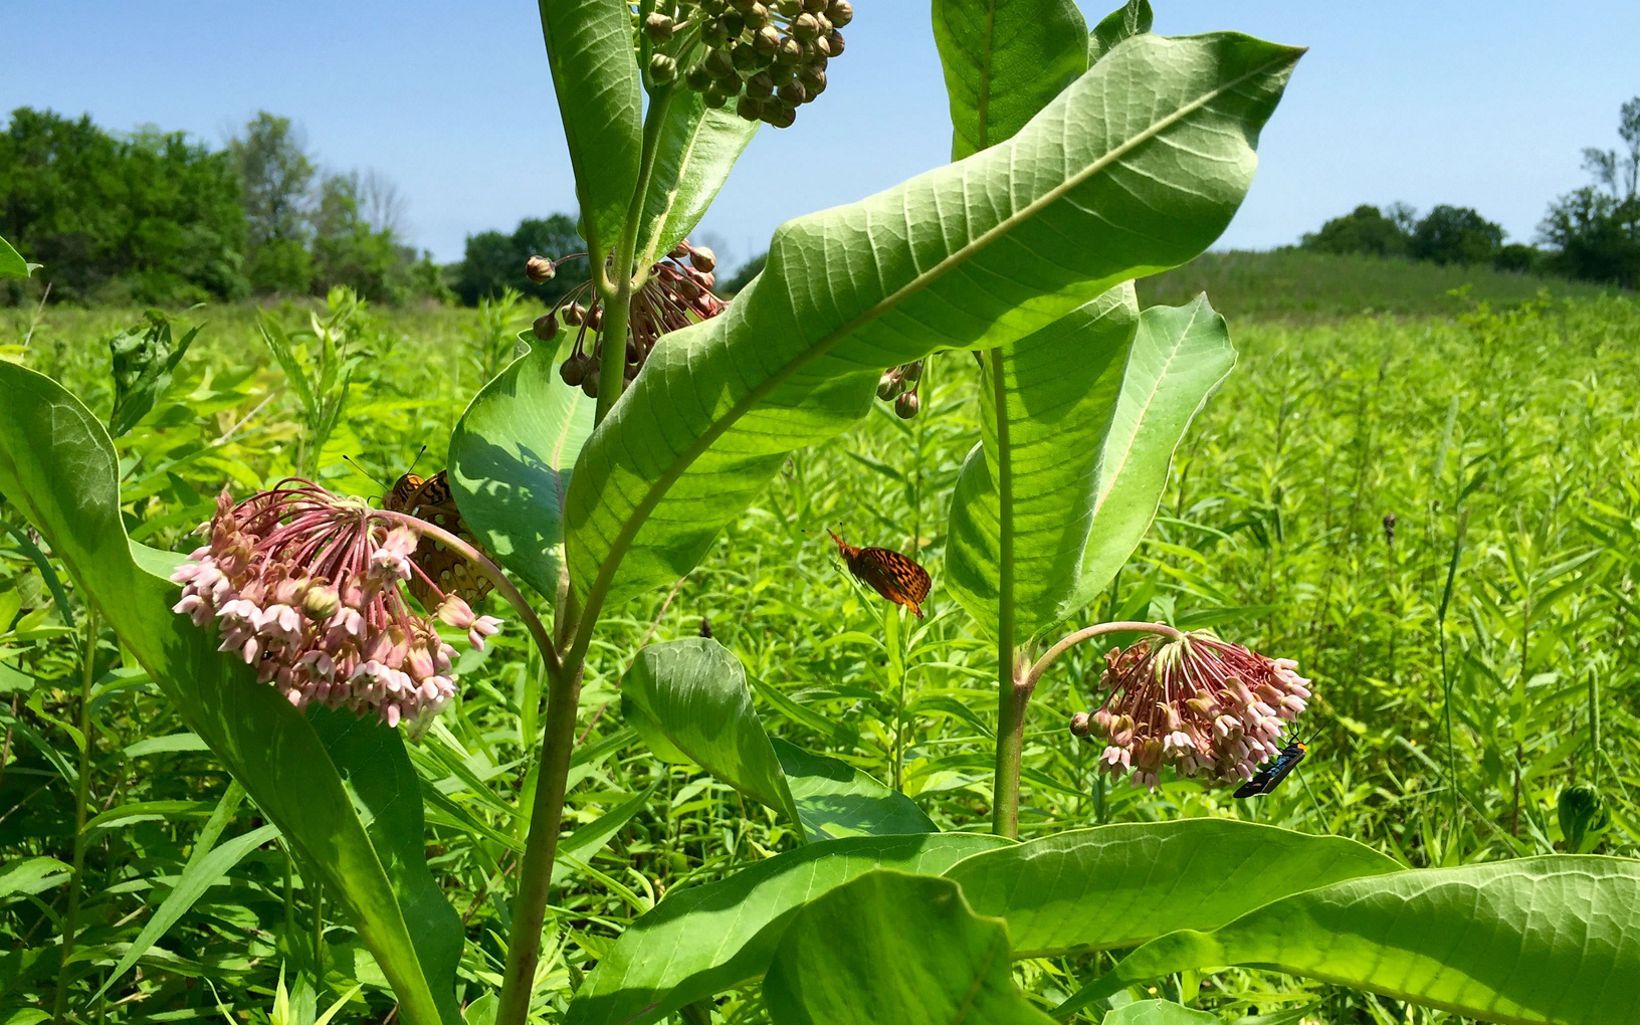 Orange and black butterflies land on the green leaves and pink flowers of a milkweed plant.